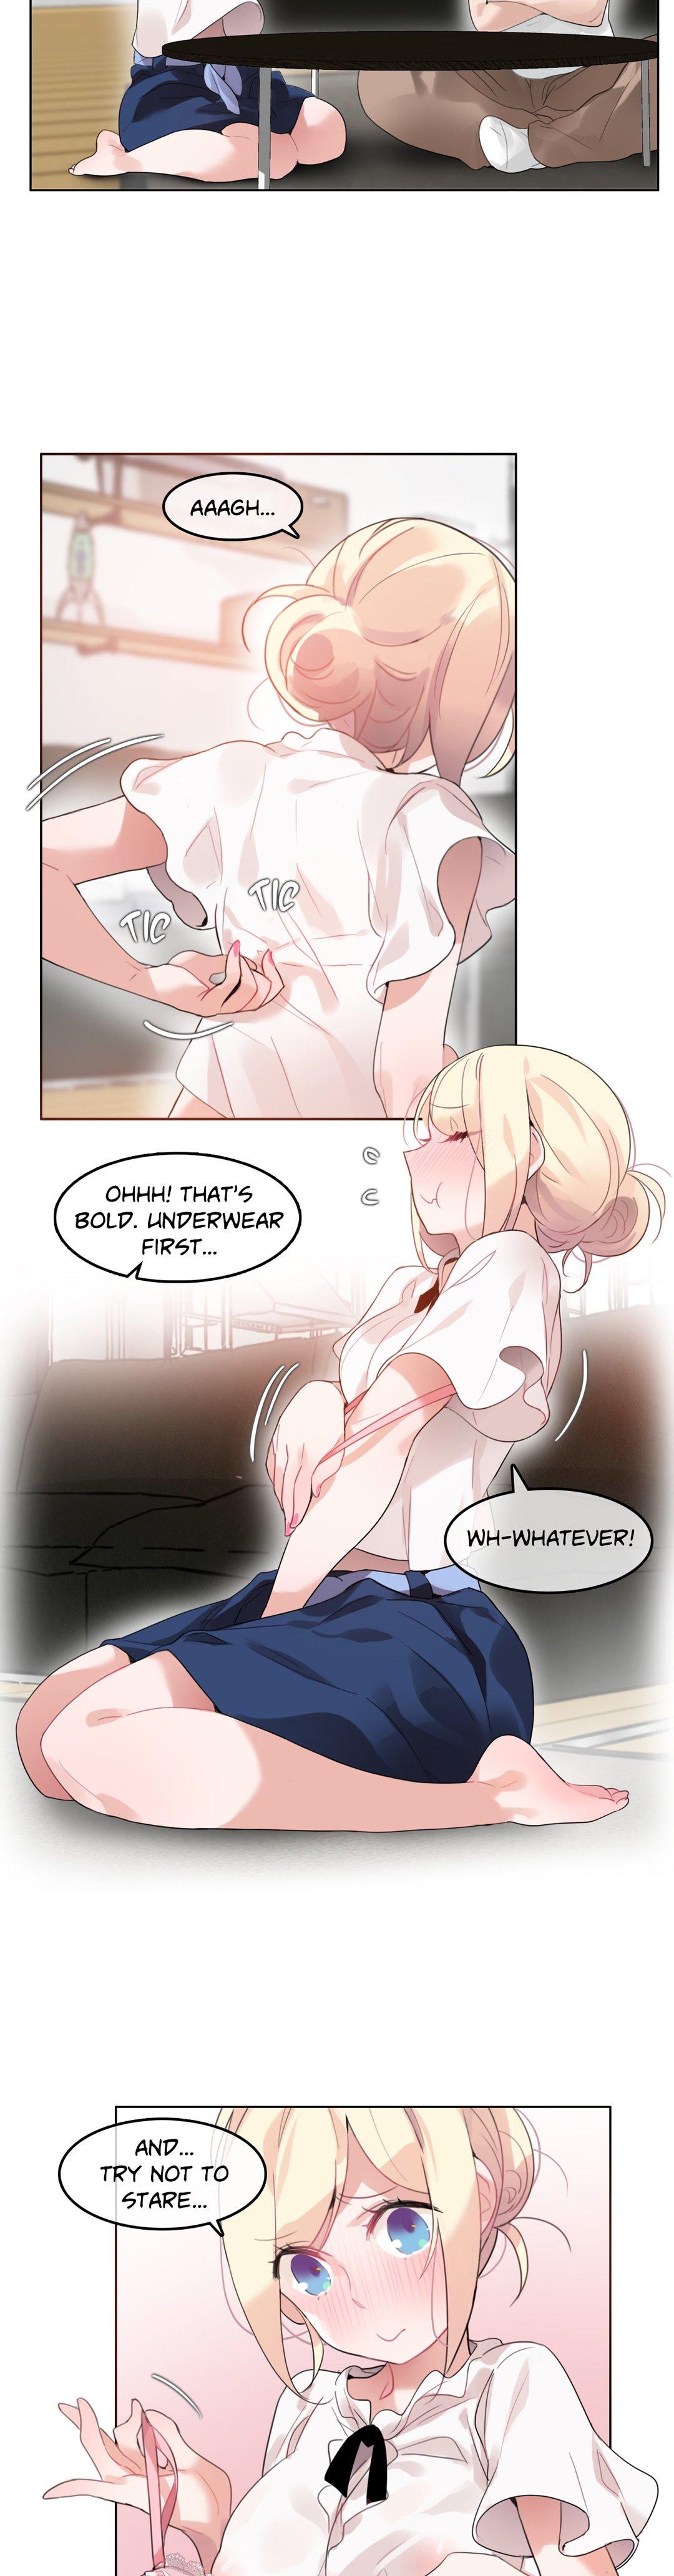 A Pervert's Daily Life • Chapter 31-35 79